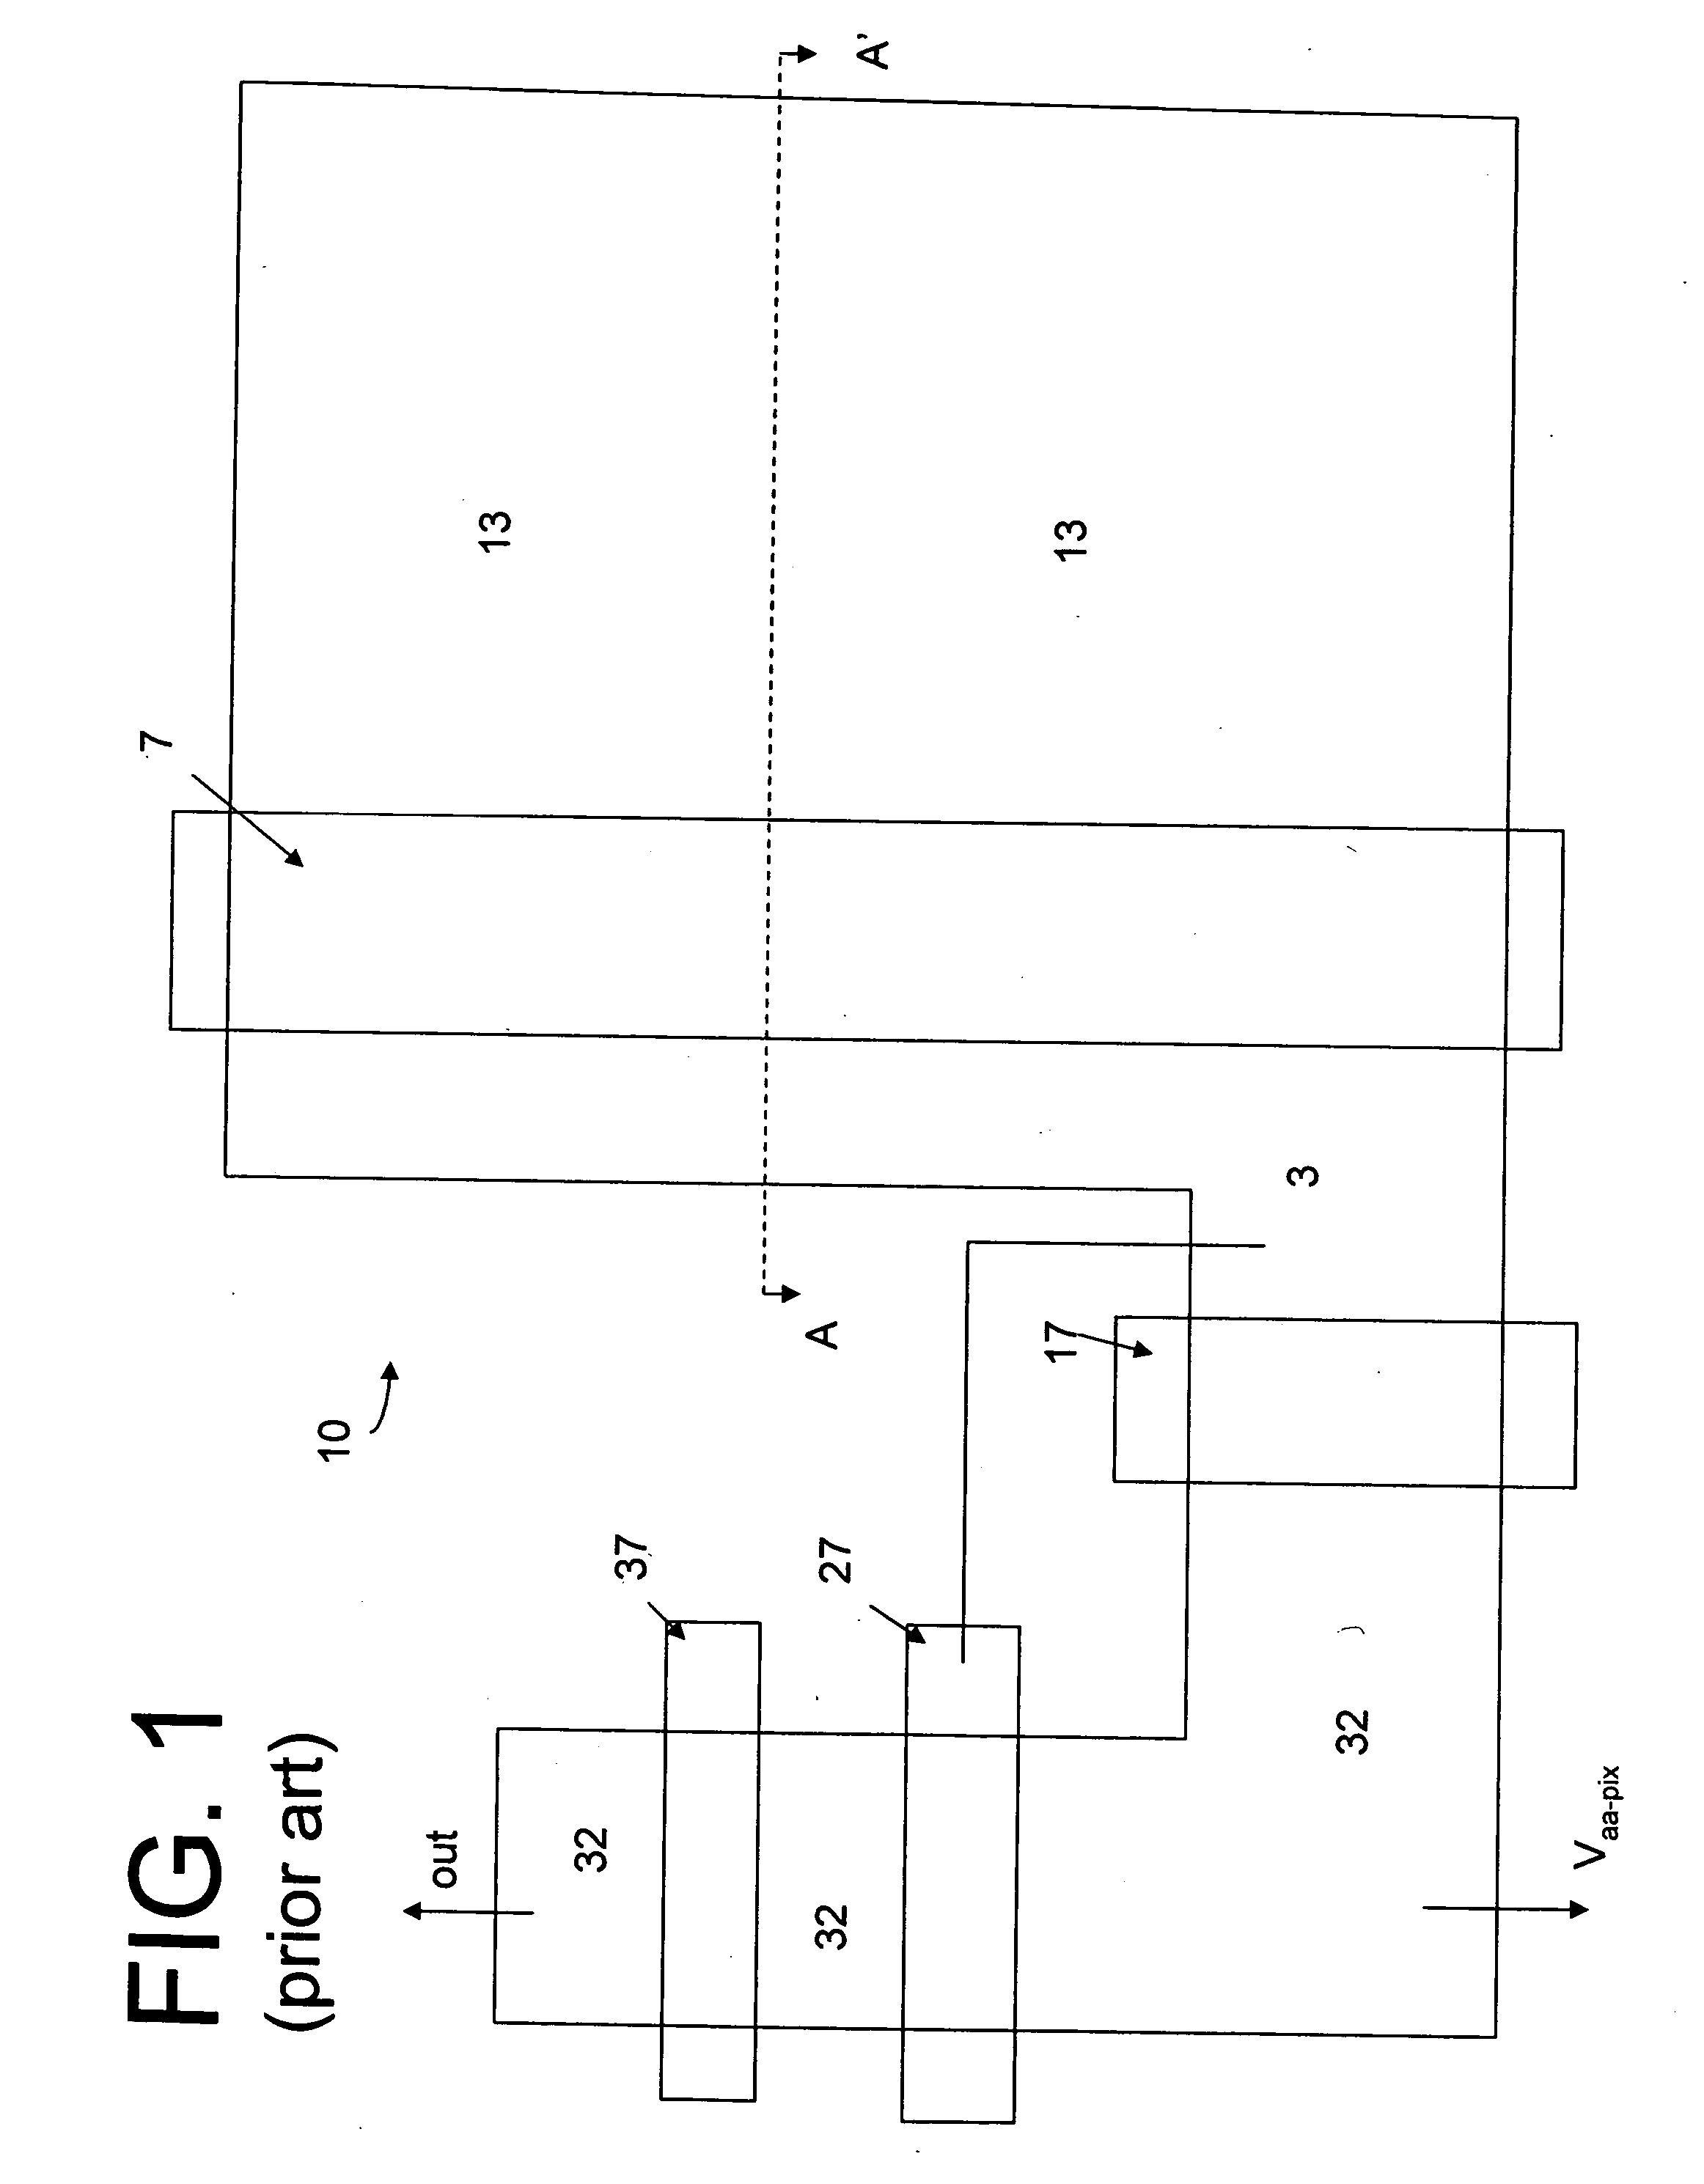 Transparent conductor based pinned photodiode